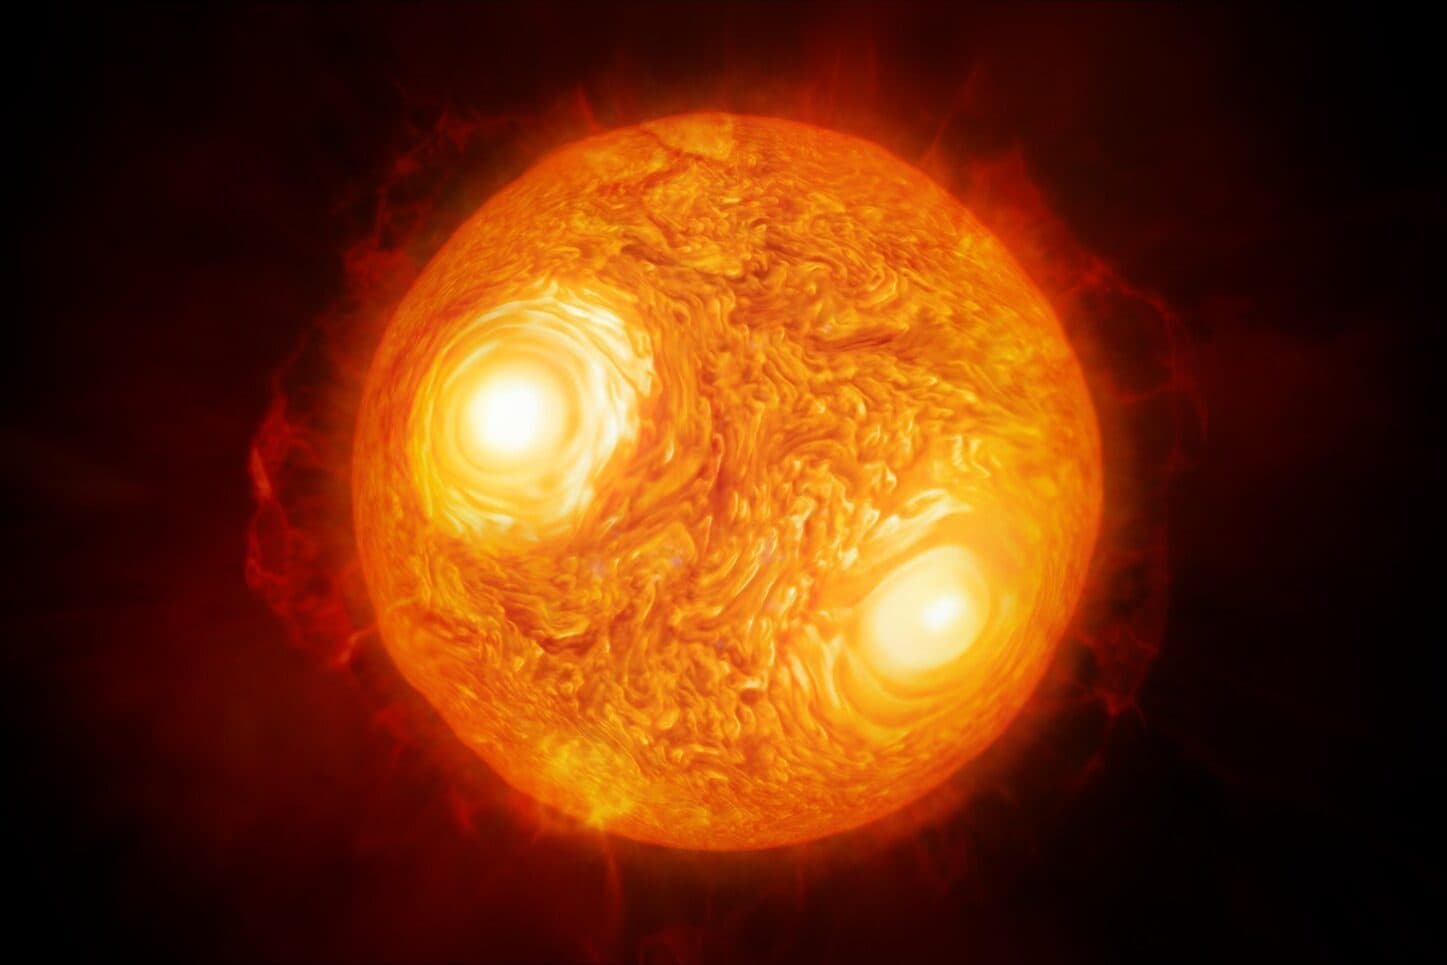 Artists impression of the red supergiant star Antares 1